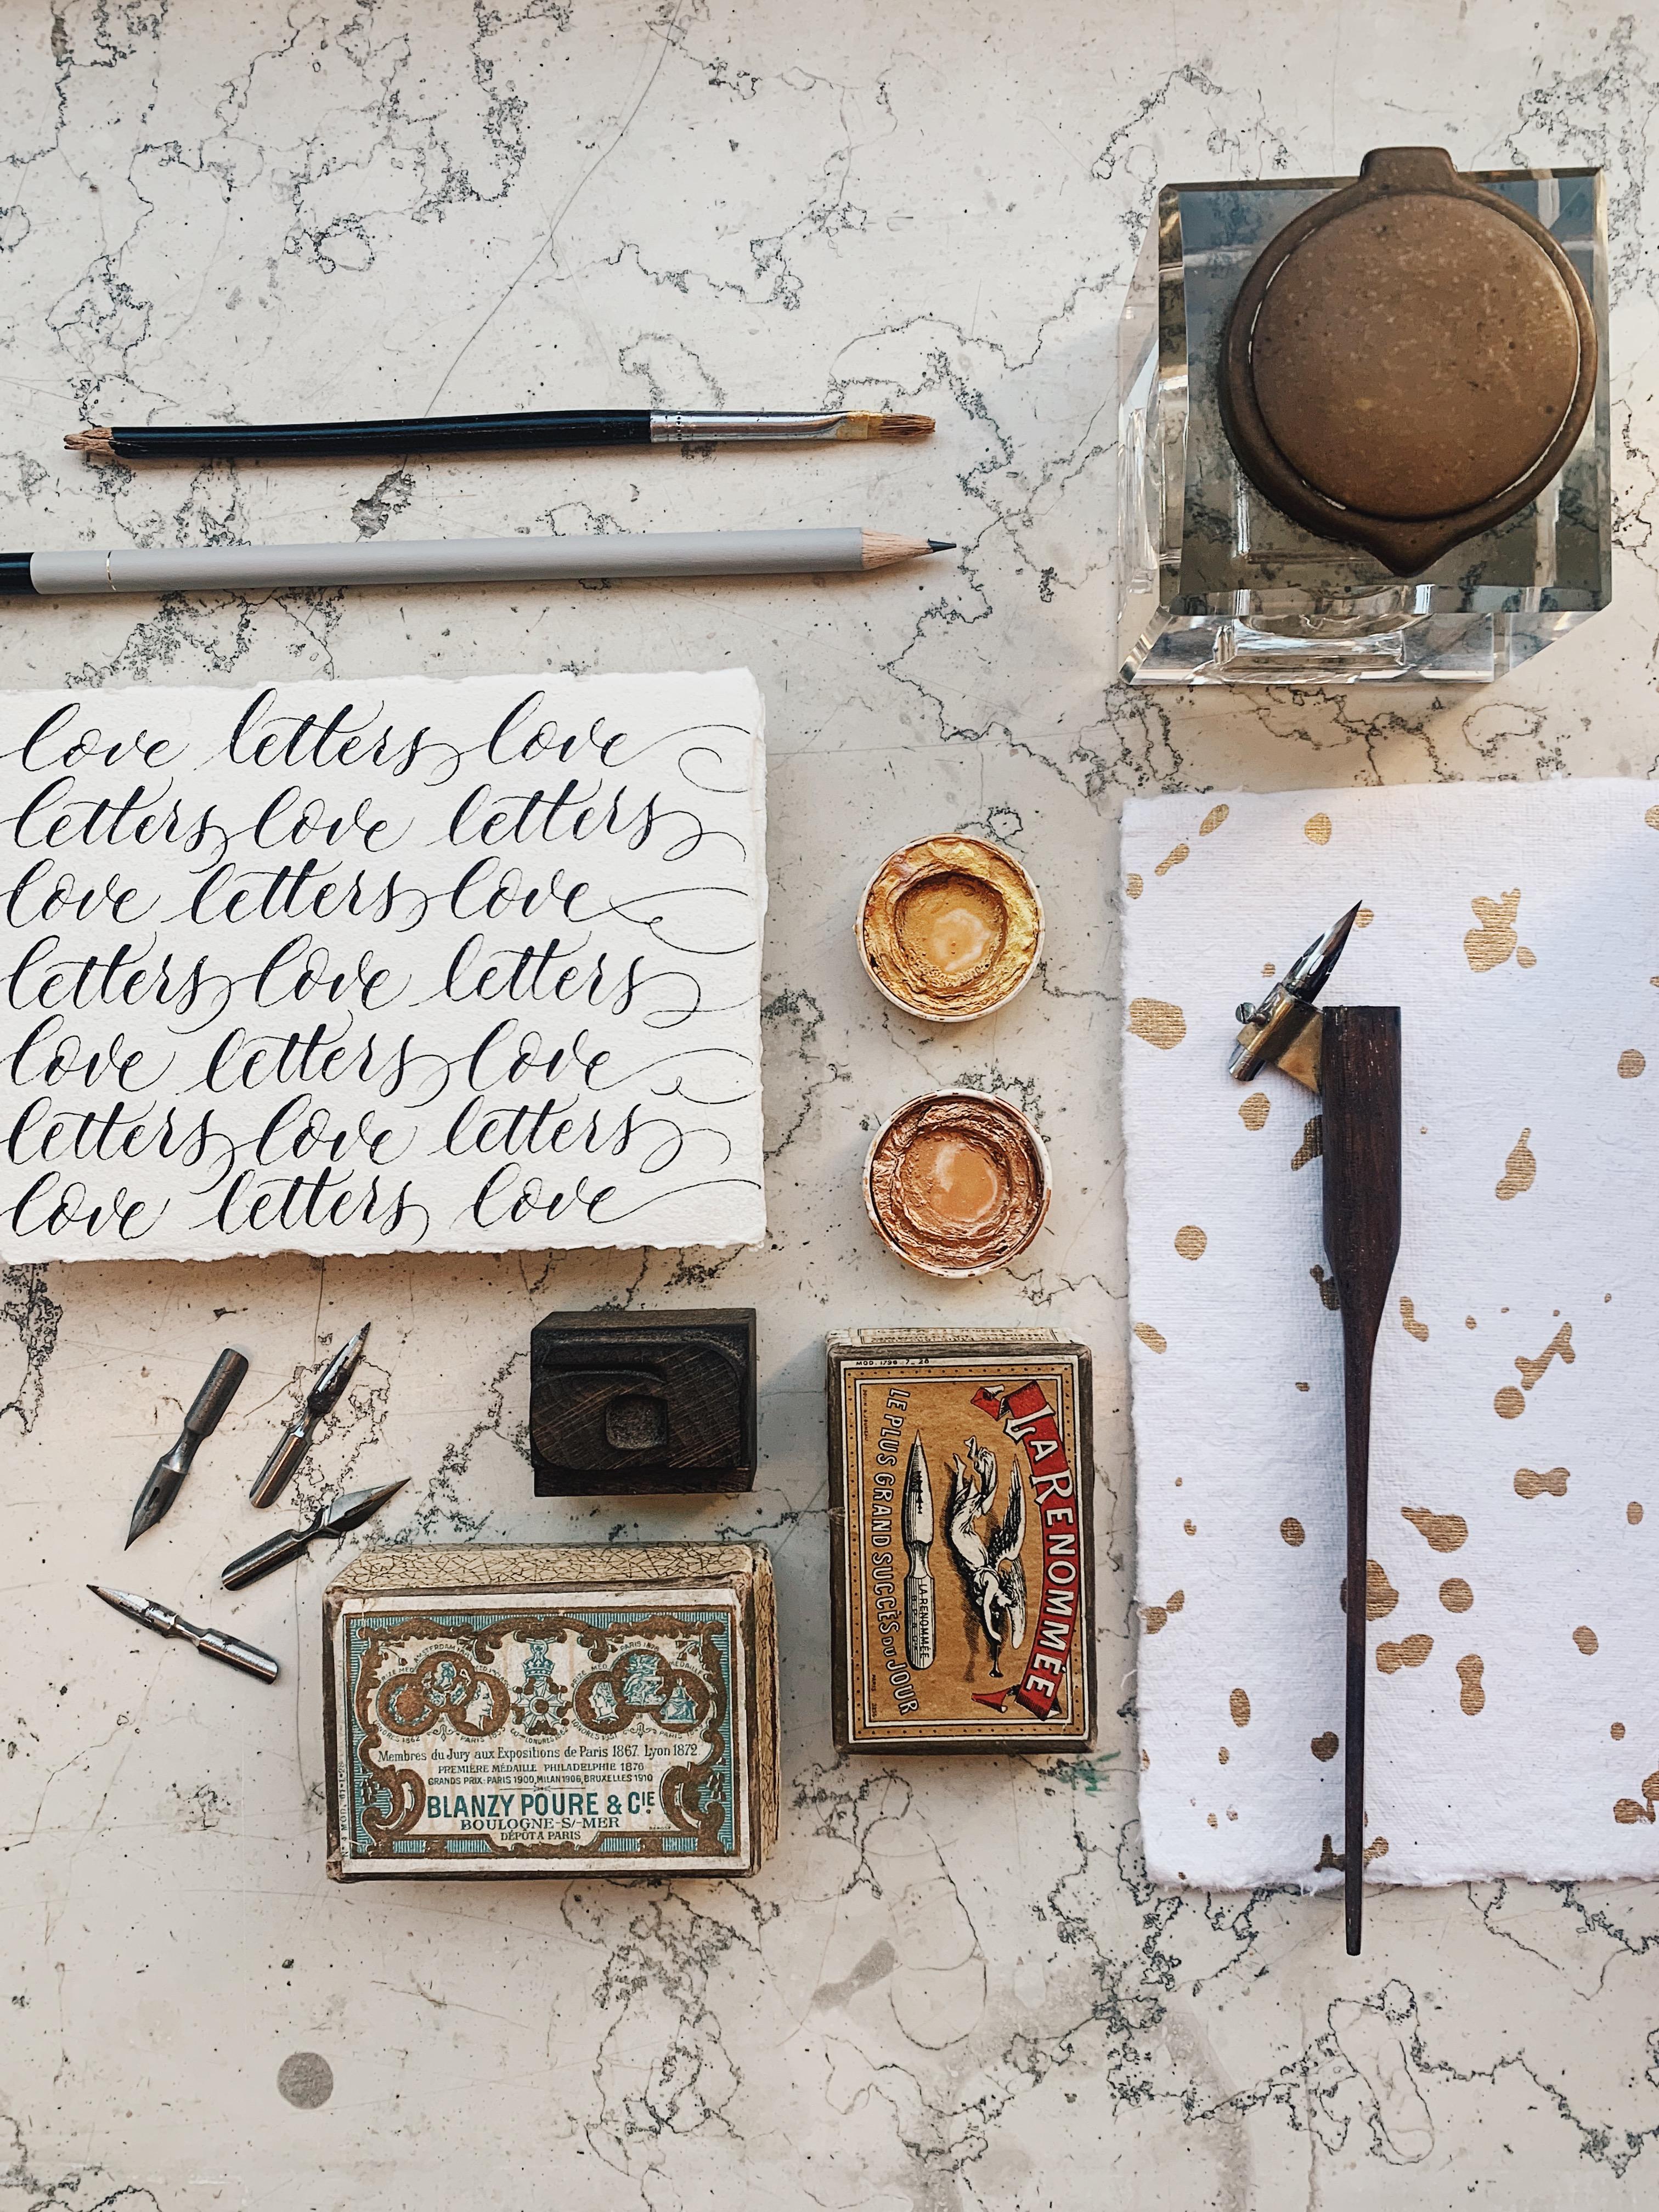 Intro to Copperplate Calligraphy Workshop - 4hrs